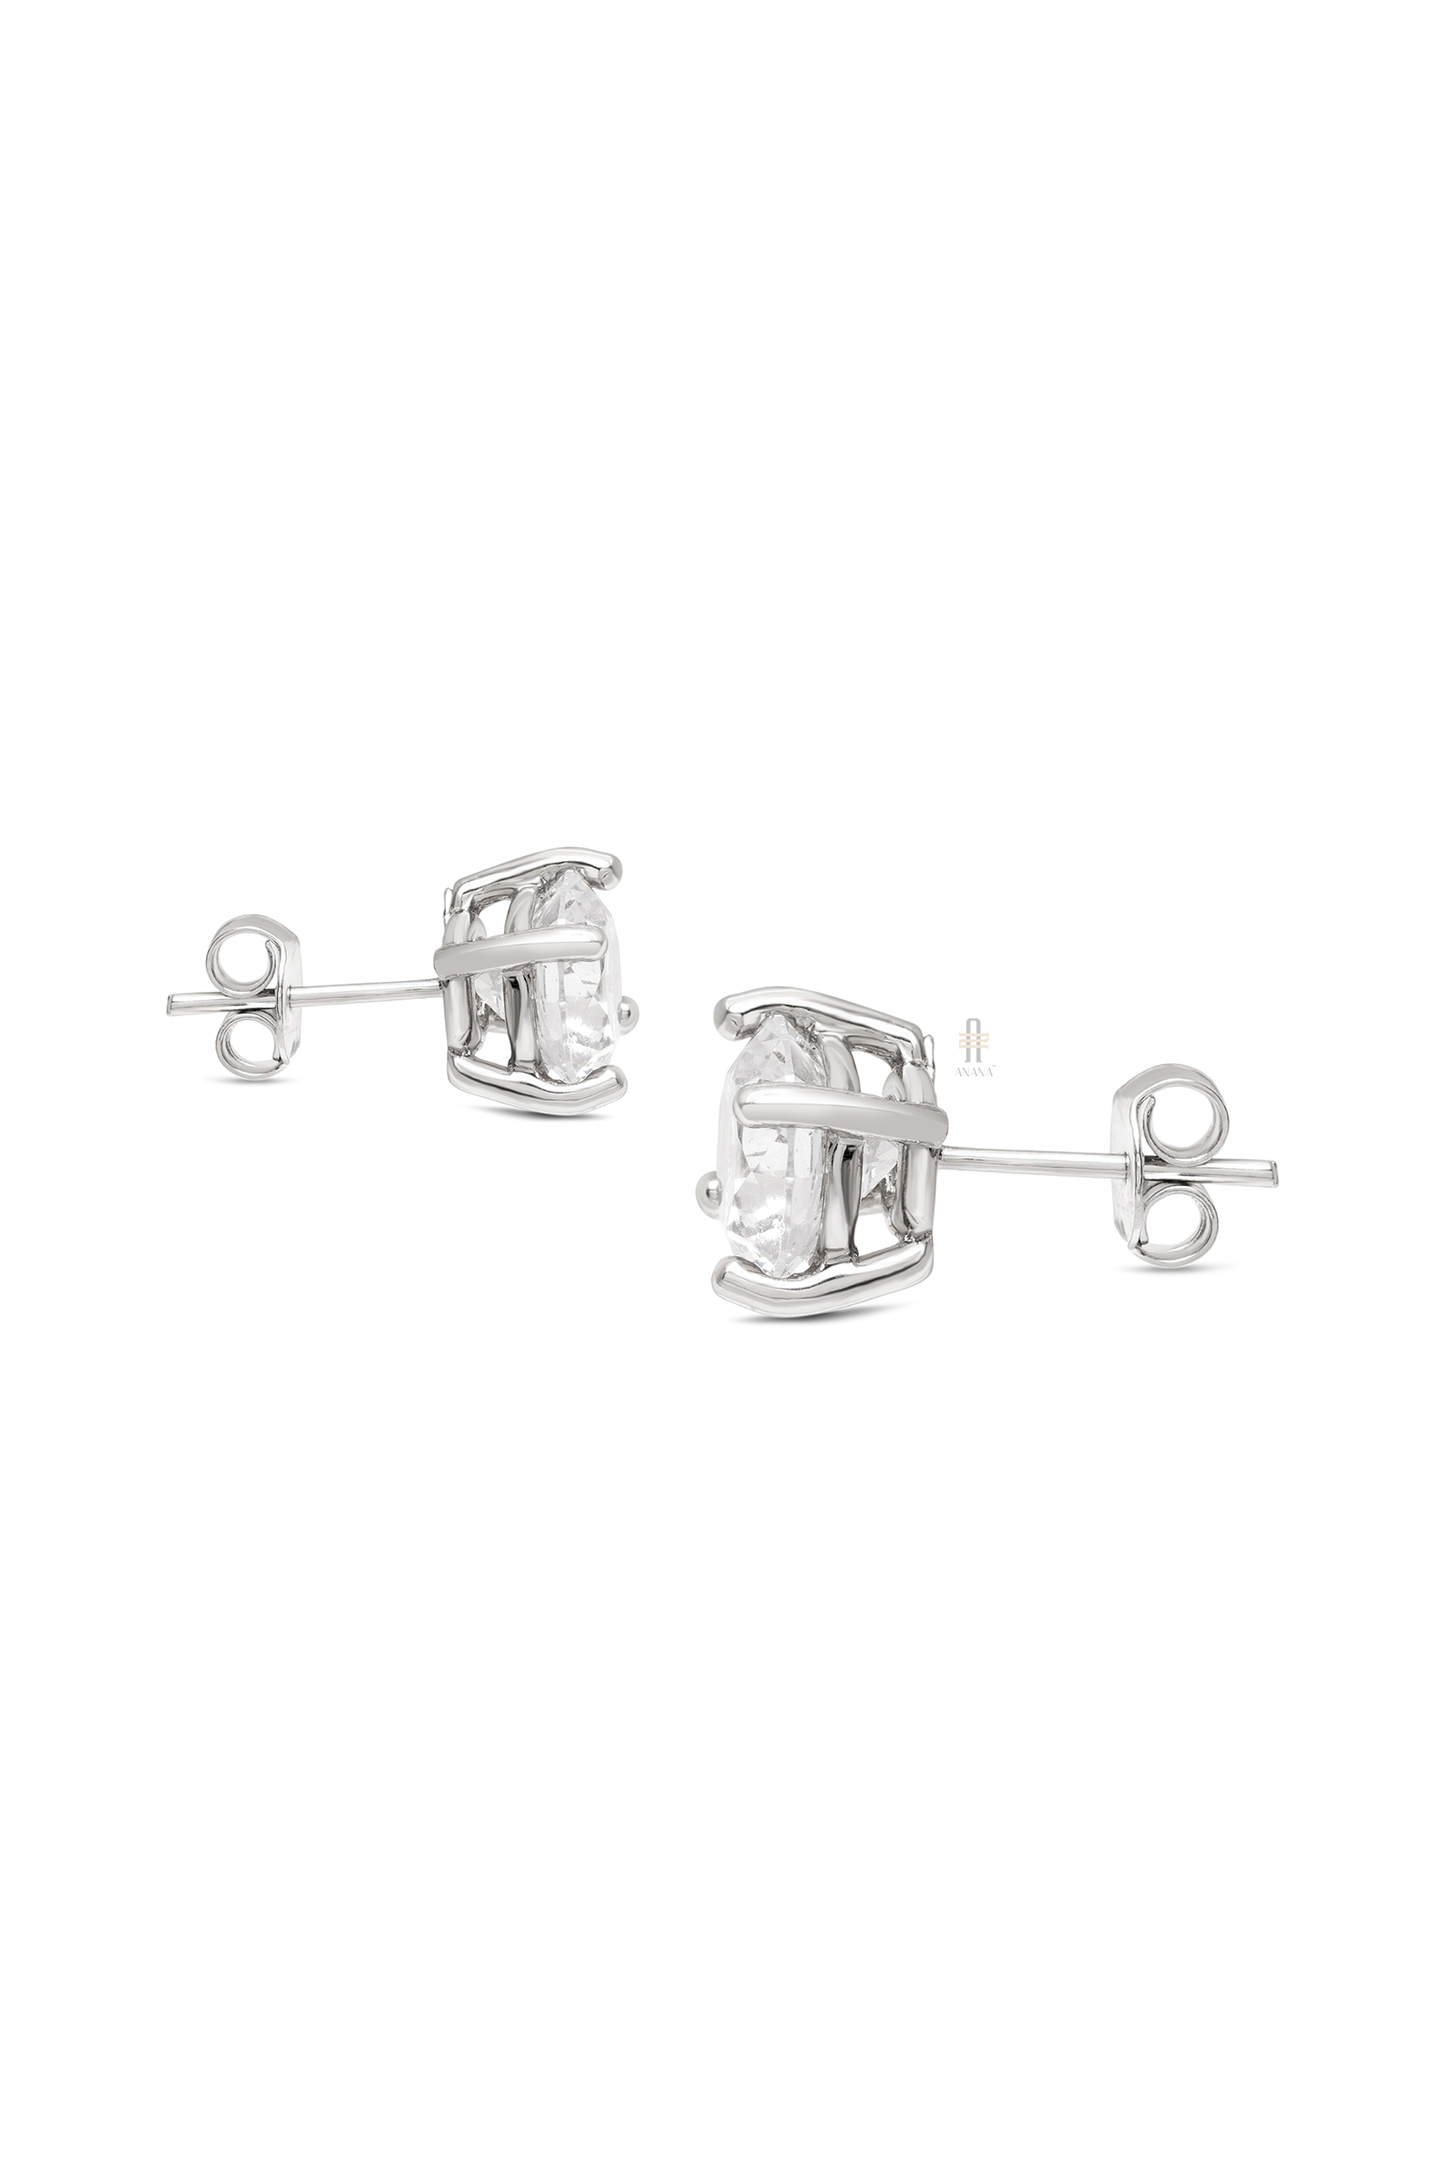 Tanni 1 & 6.84 Carat Solitaire Earrings